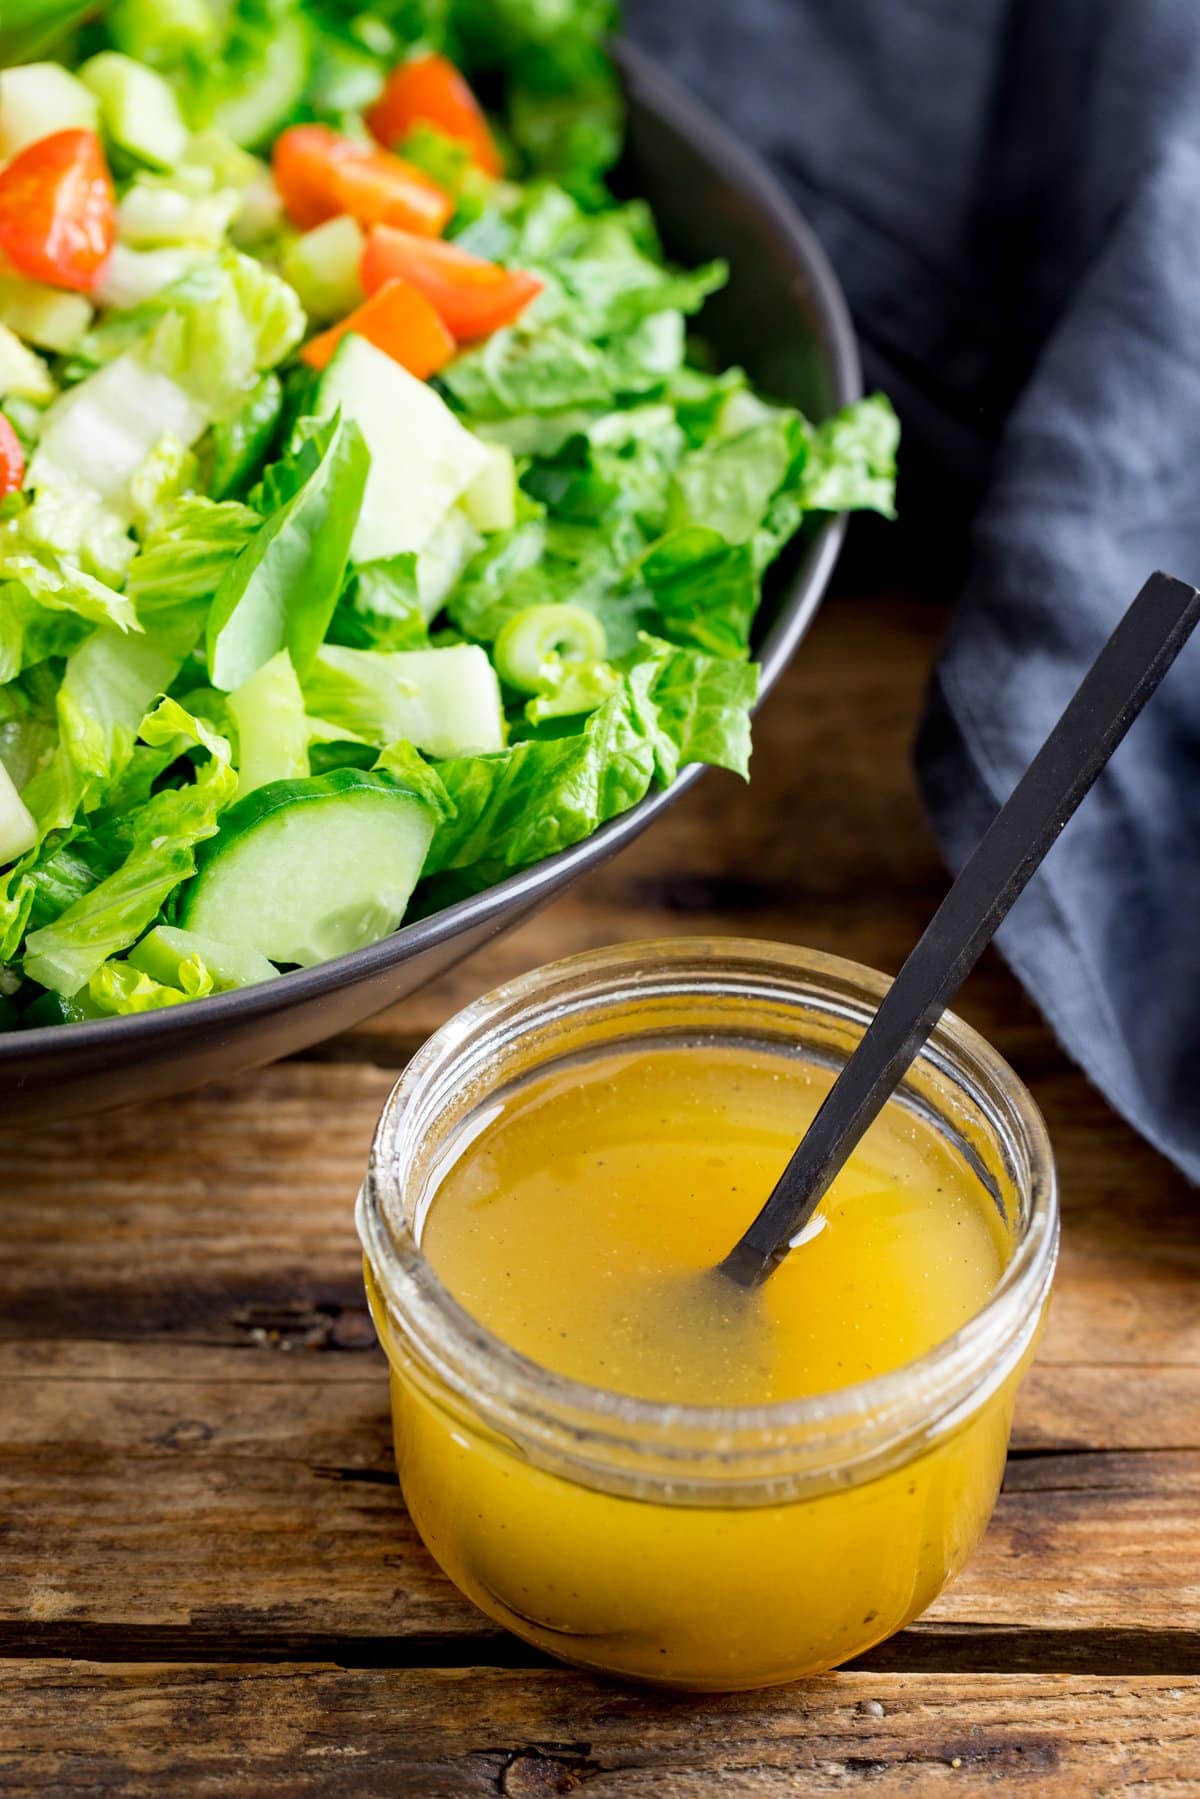 Jar of honey mustard salad dressing with a black spoon sticking out on a wooden table. Bowl of salad in the background.